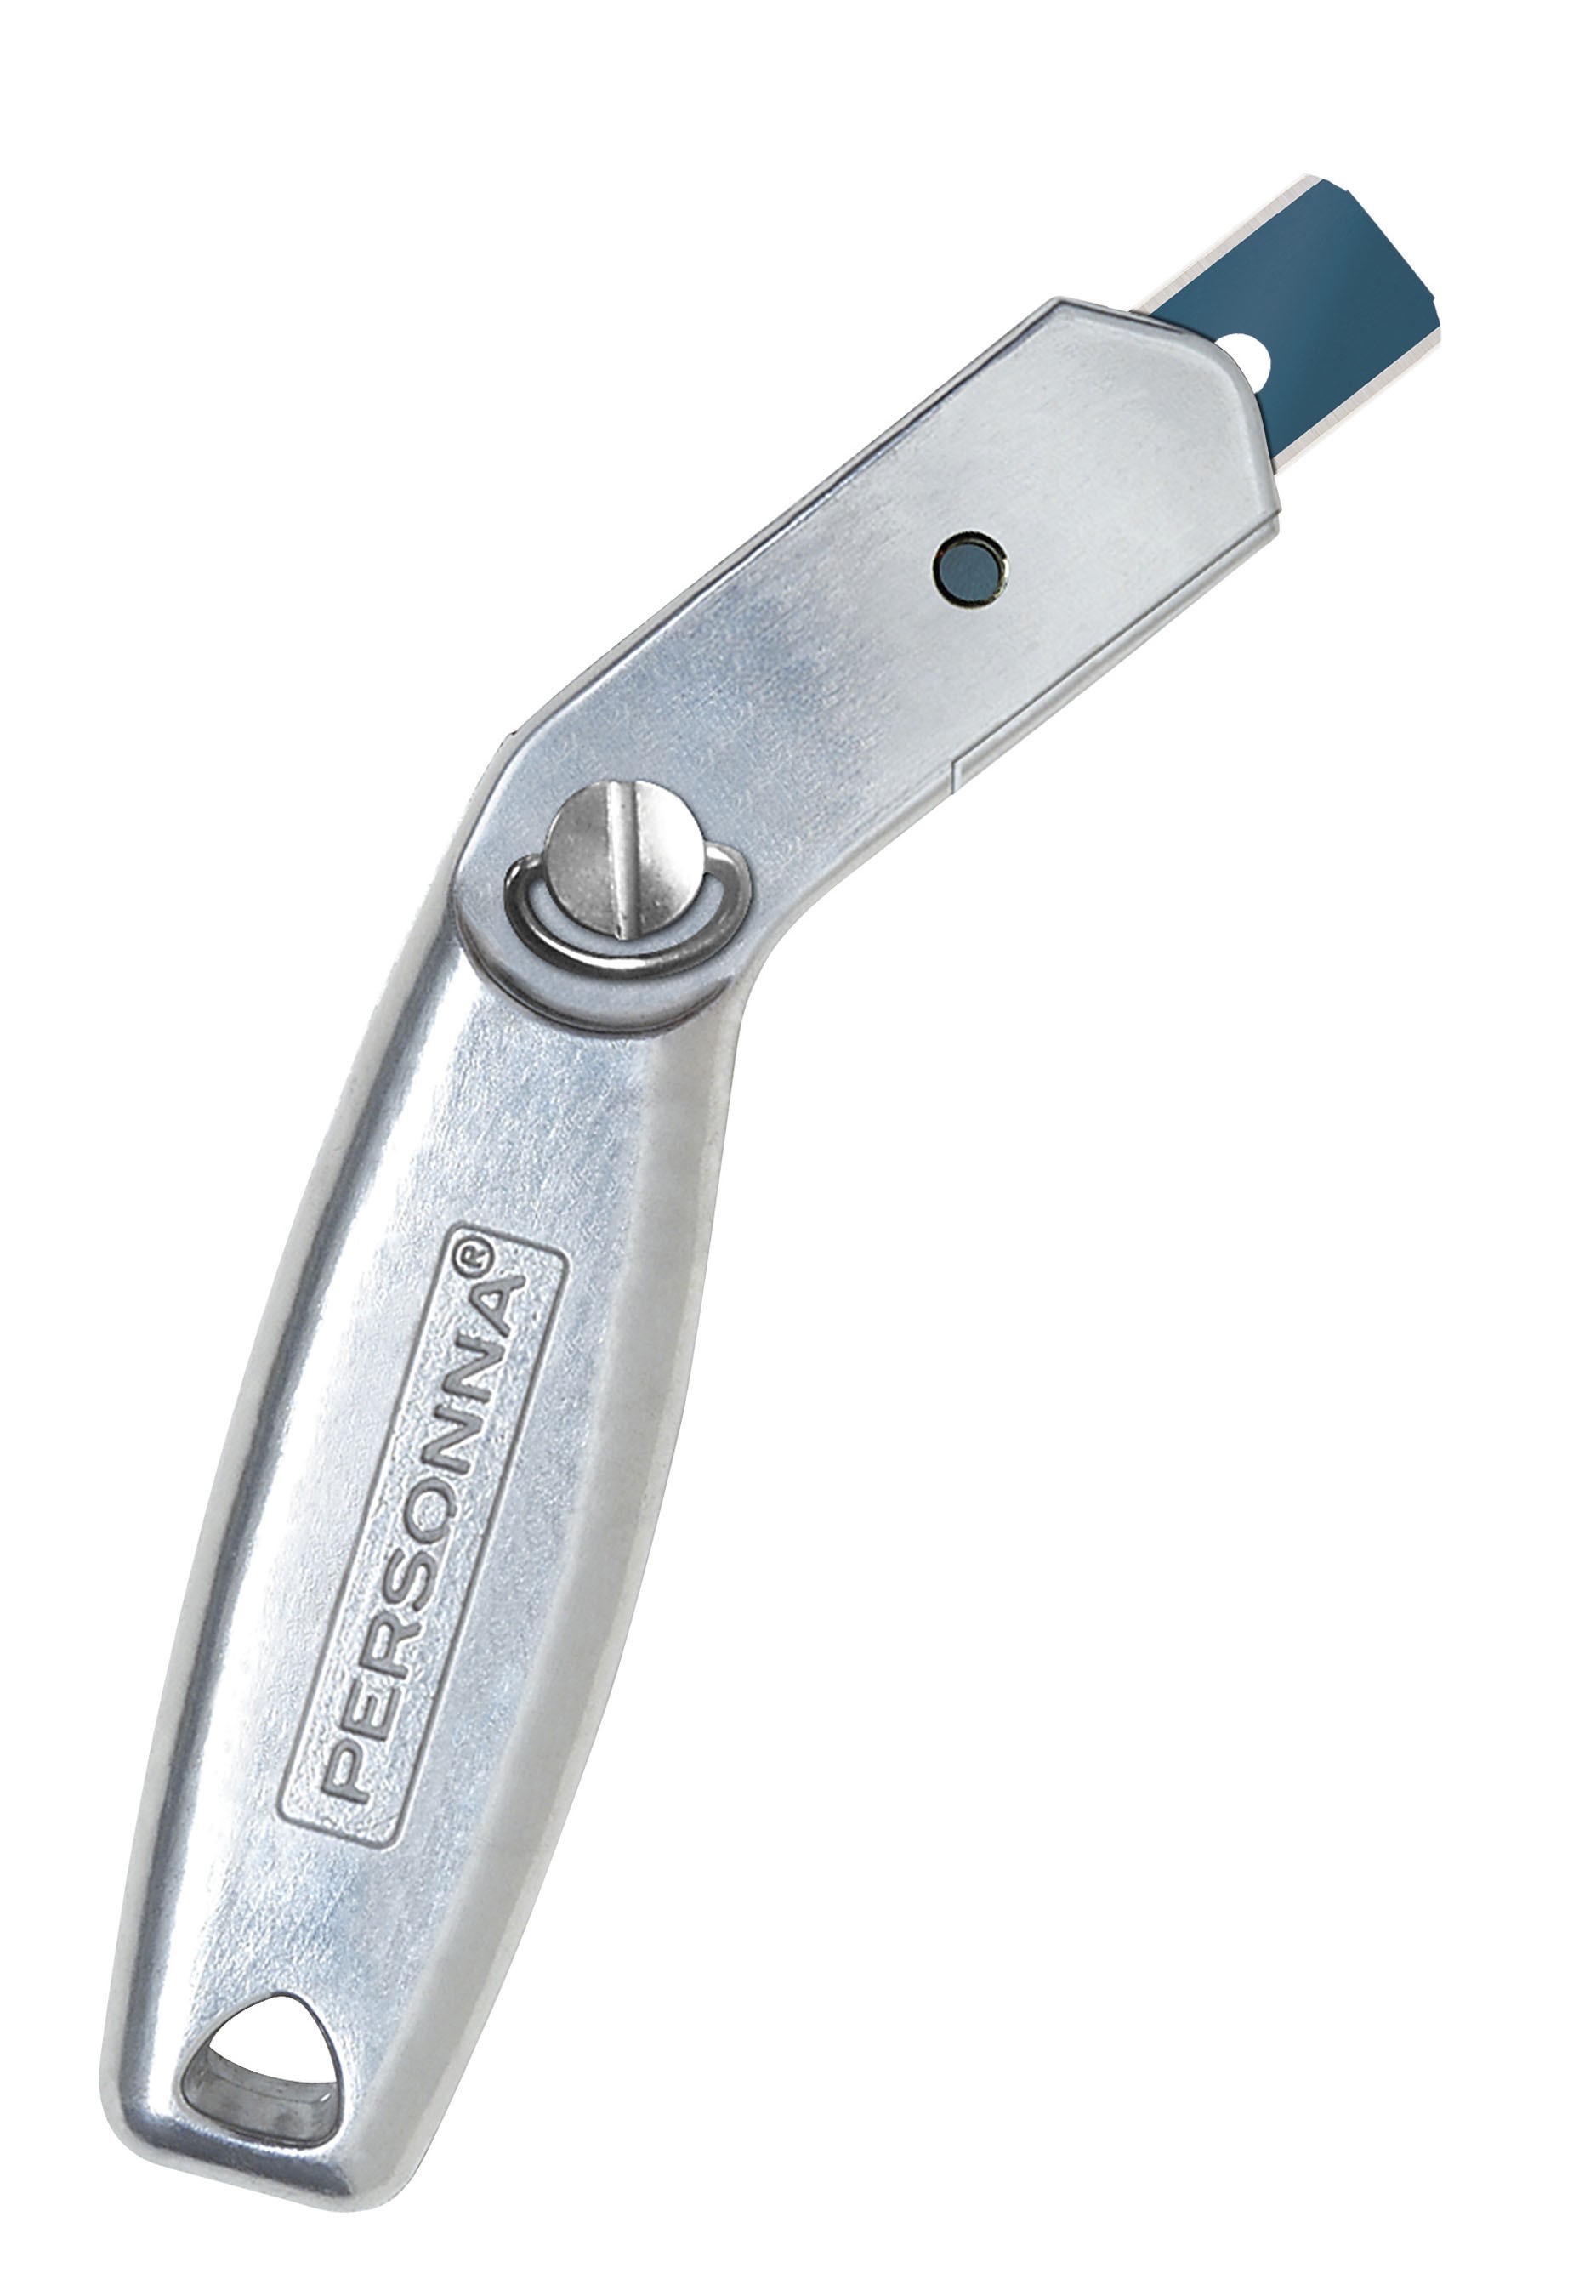 The PERSONNA(R) WHITE LIGHTNING(TM) ALUMINUM FIXED BLADE CARPET KNIFE is a re-design of the 20-year old classic, the fixed blade carpet knife. The new design delivers all the features the pro end-user wants including an all-aluminum body and in-handle blade storage for fast blade changes.